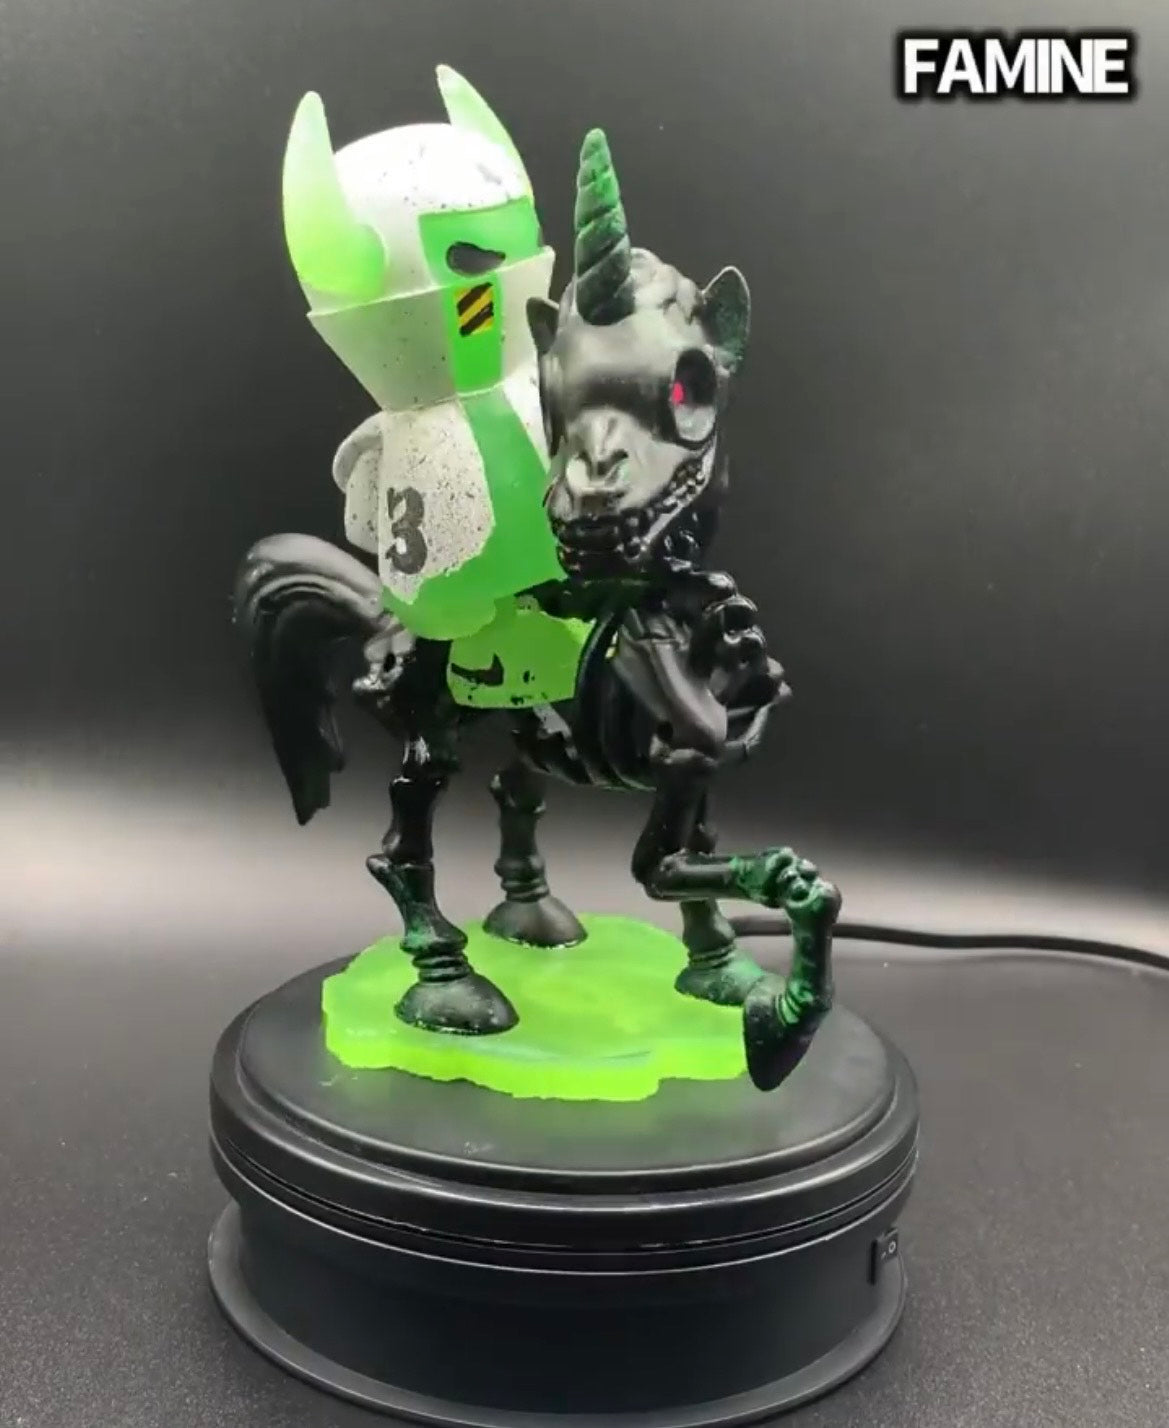 Hand Painted Resin figurine of a unicorn with a green and white object on a black stand.